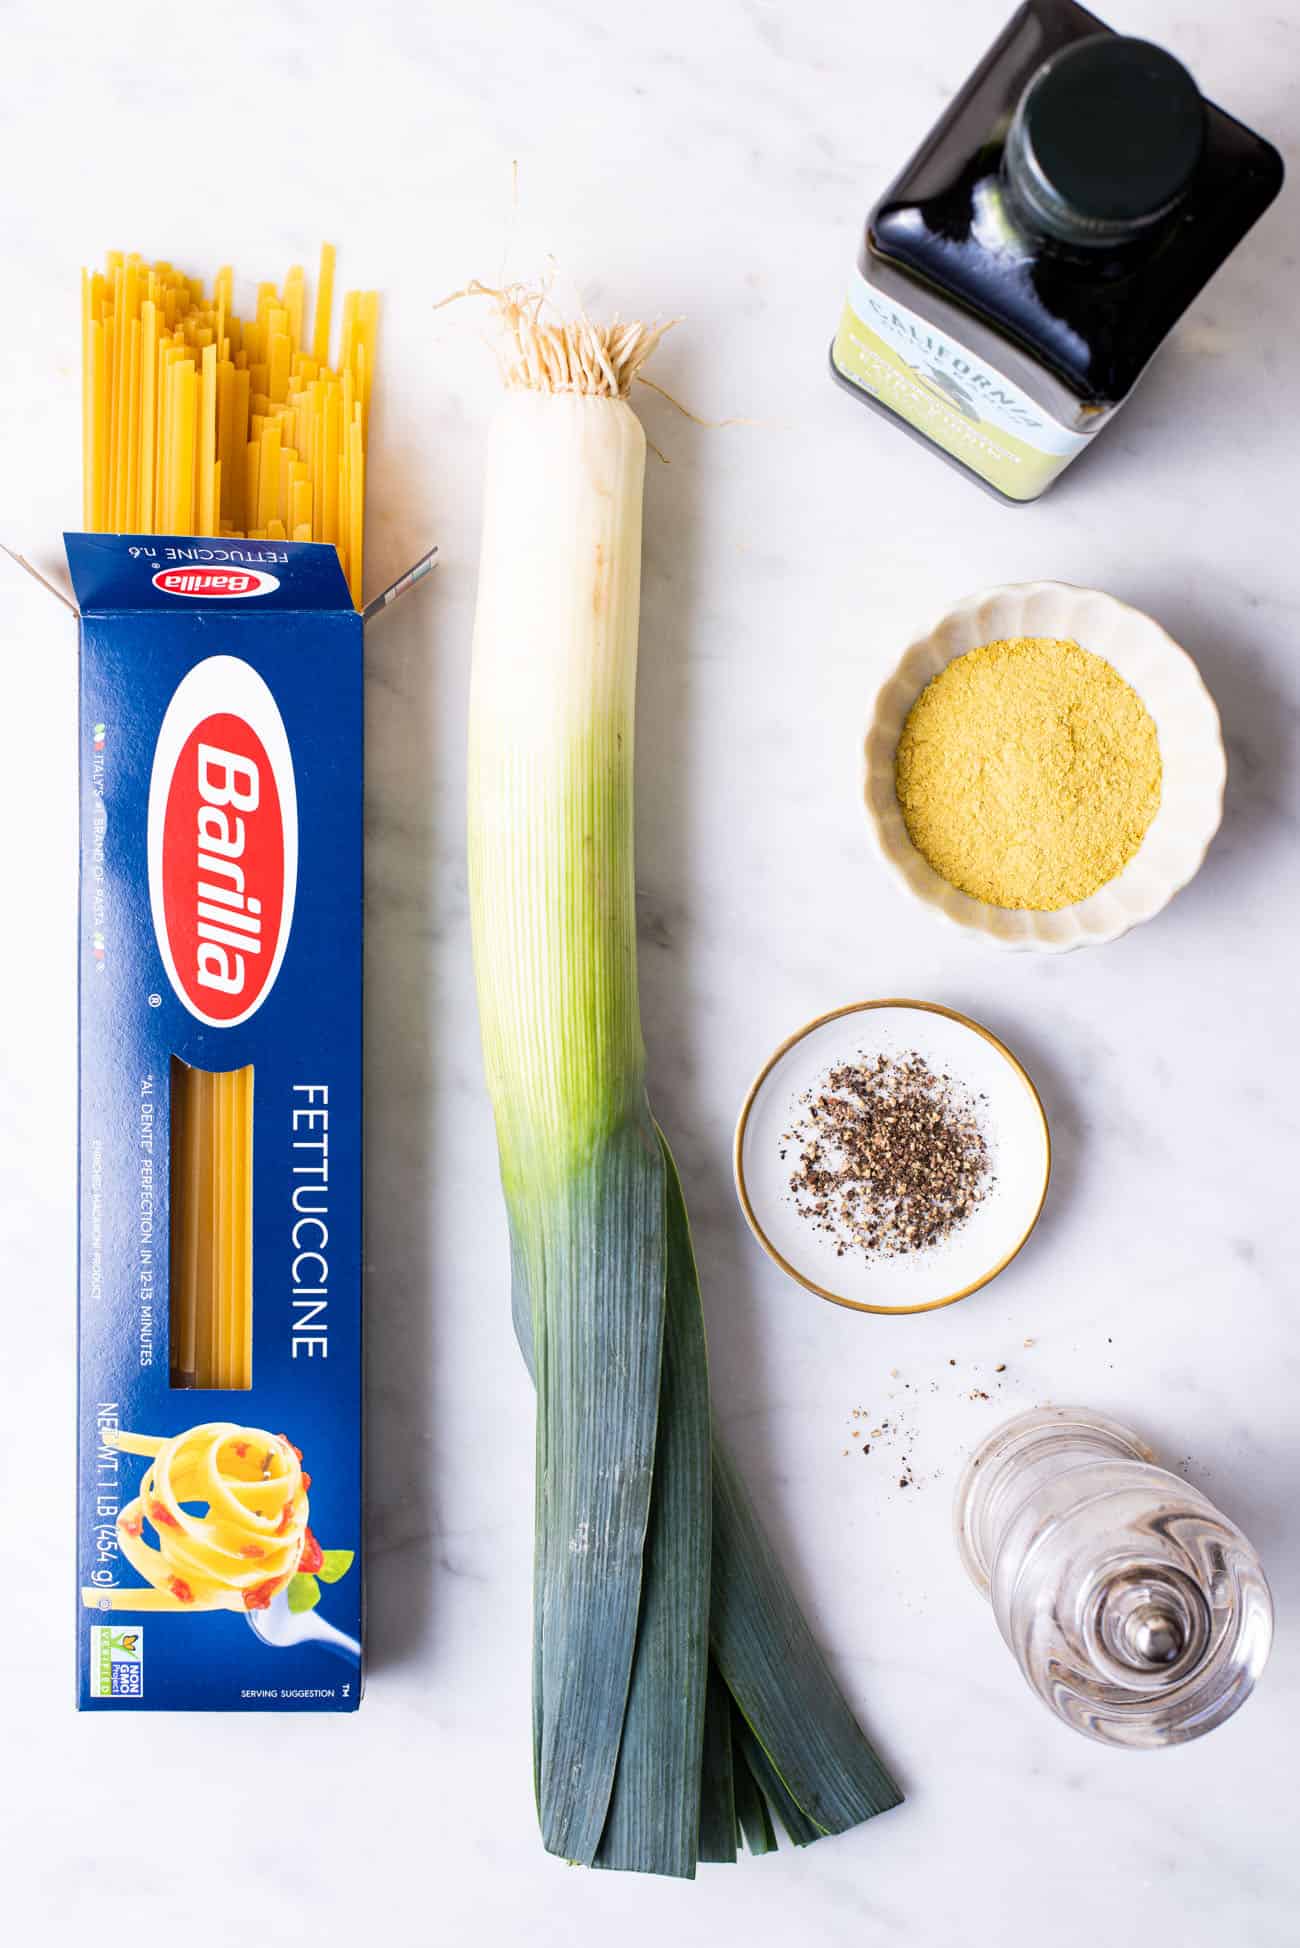 Barilla fettuccine, a leek, olive oil, nutritional yeast, and black pepper gathered on a marble counter.